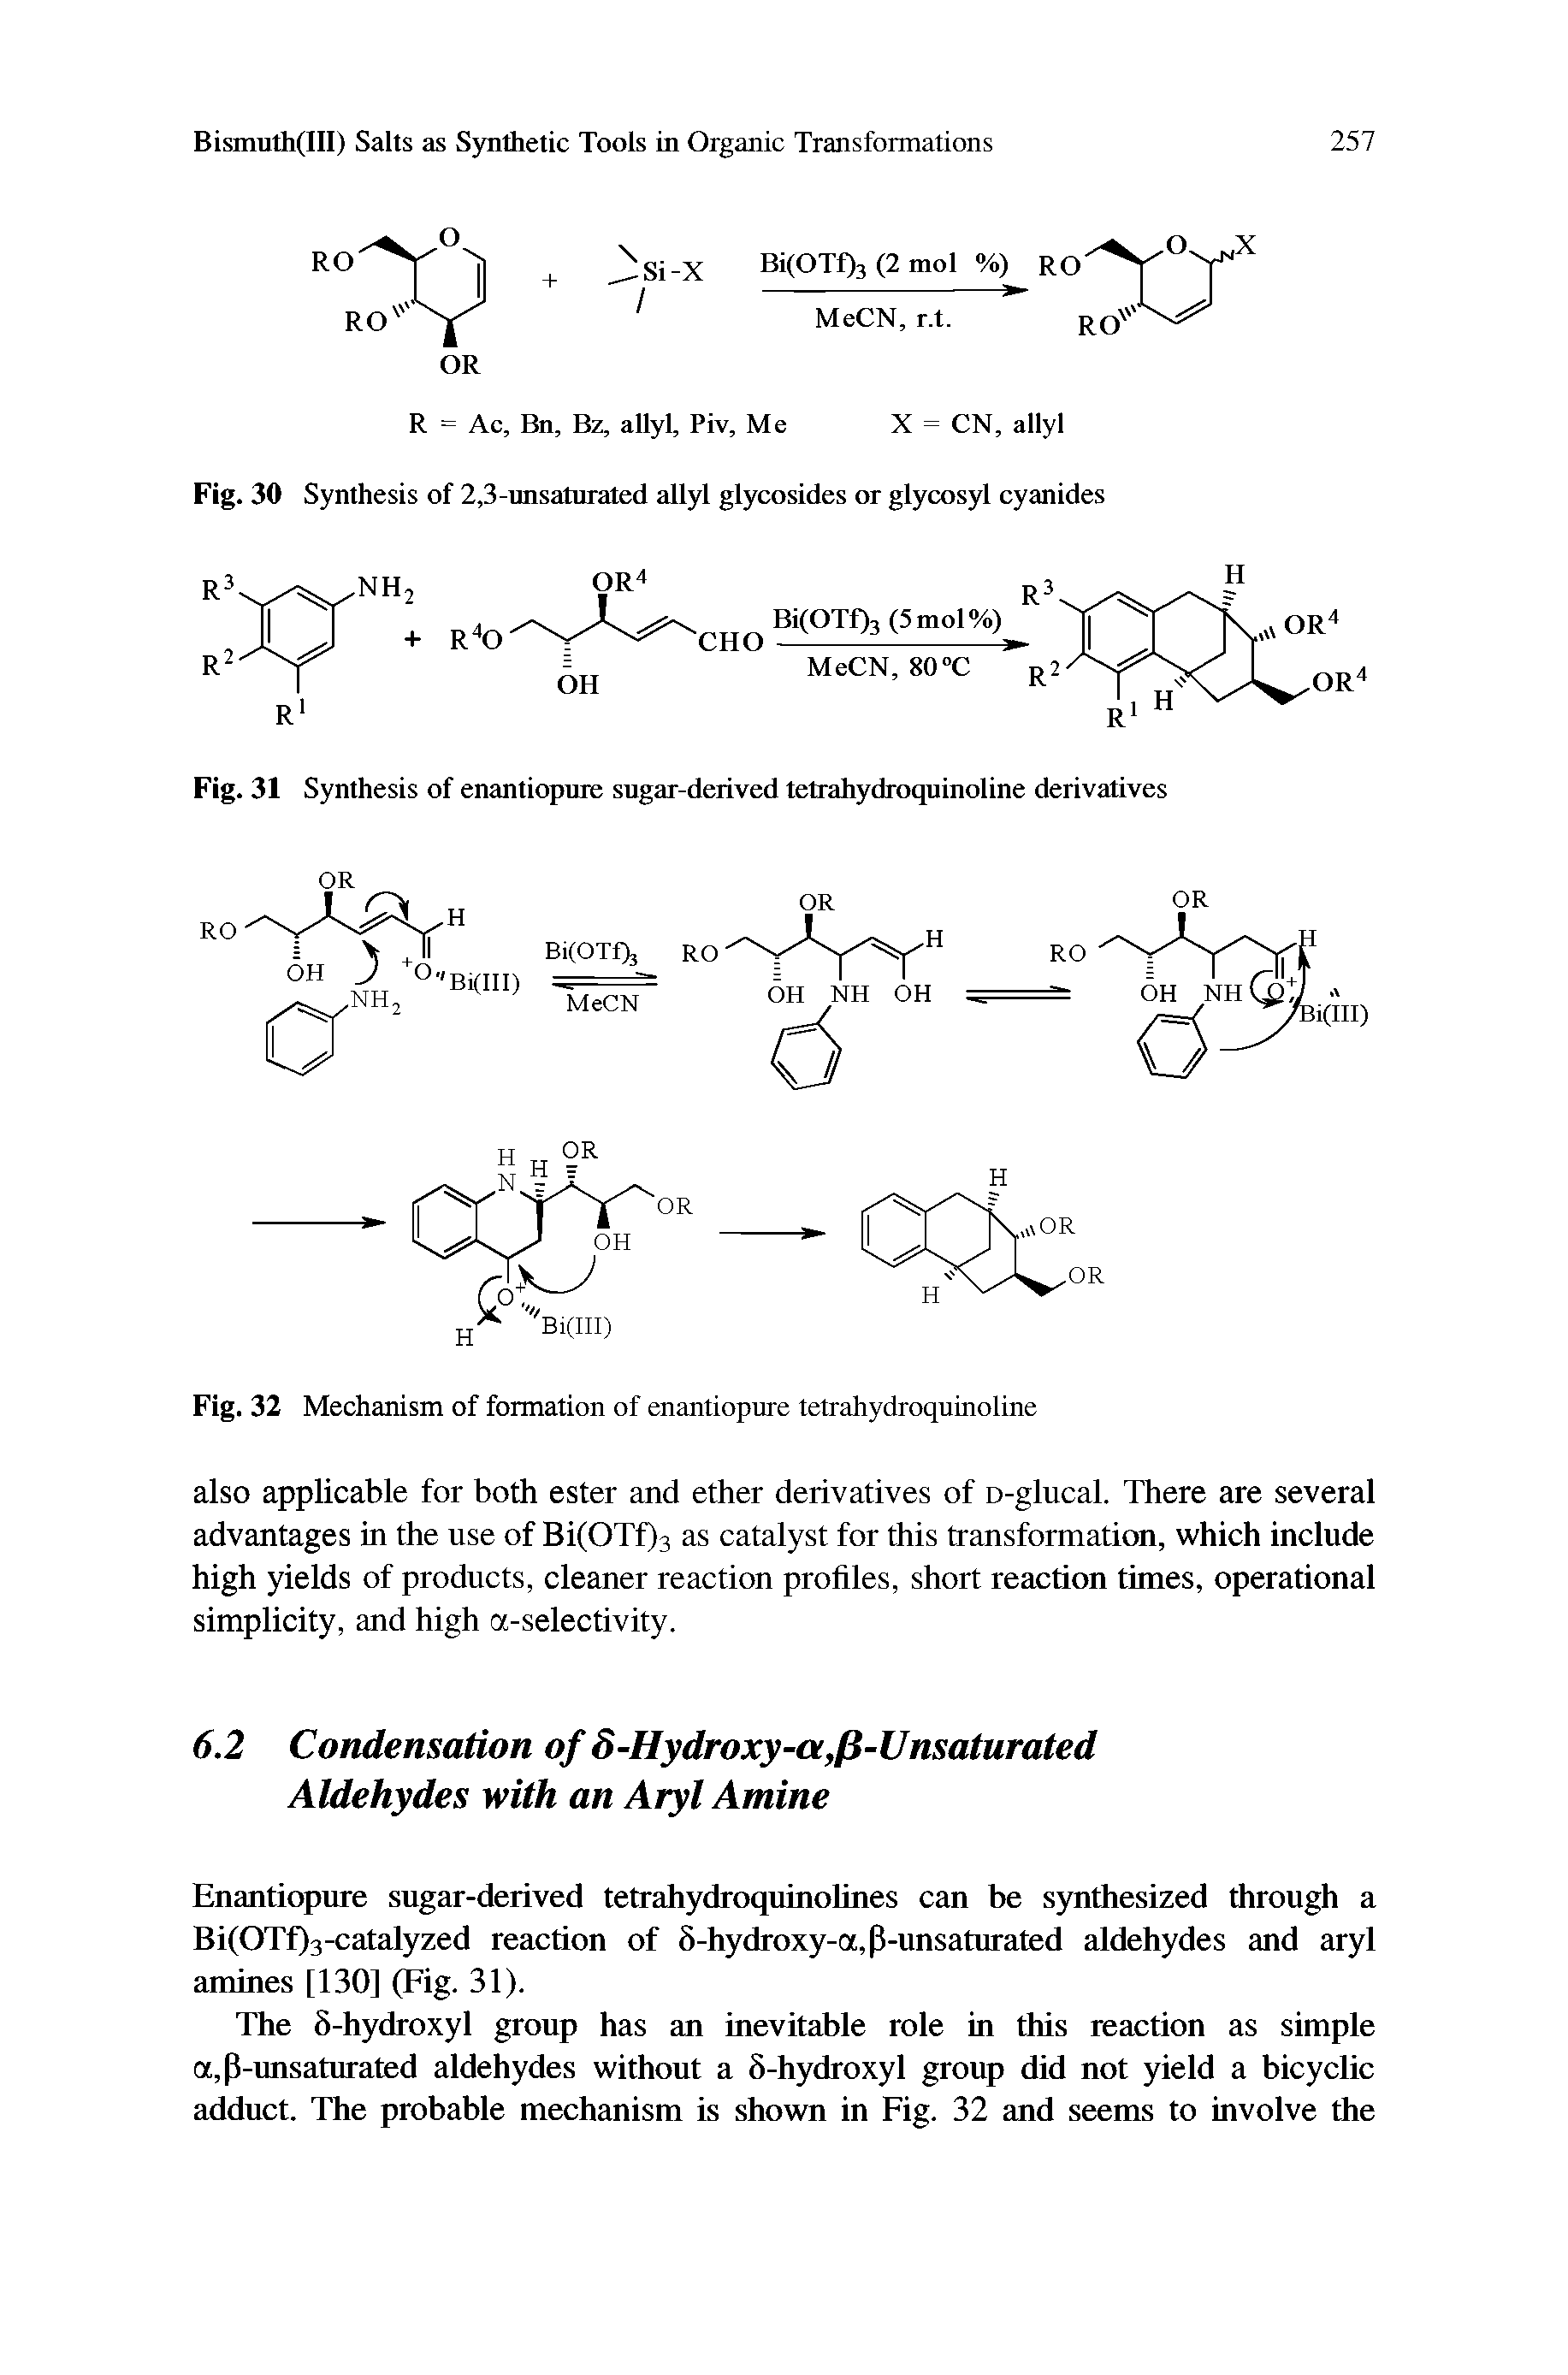 Fig. 30 Synthesis of 2,3-unsaturated allyl glycosides or glycosyl cyanides...